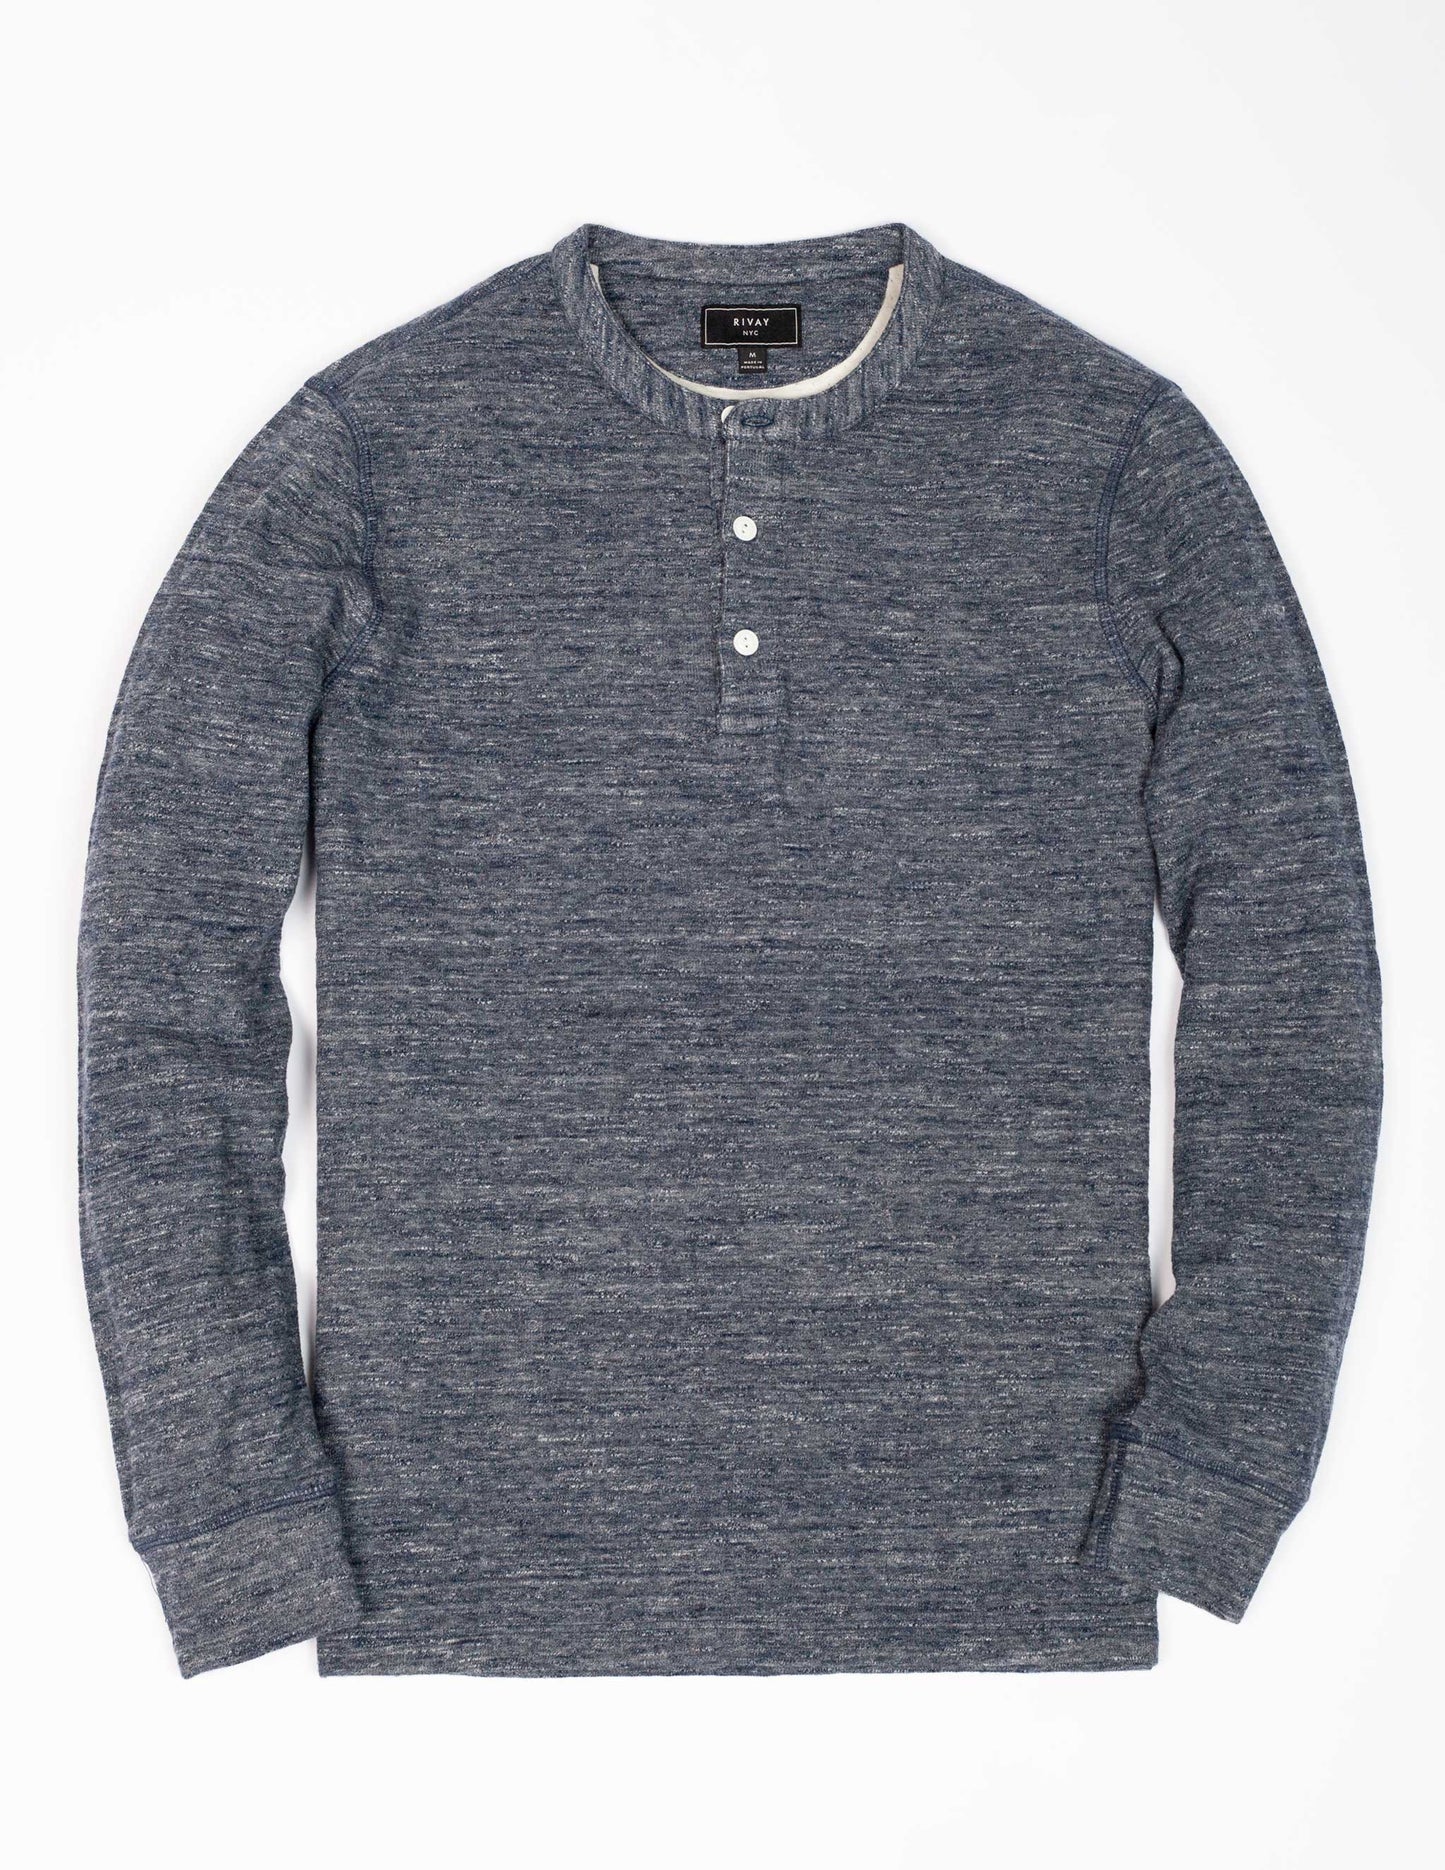 Ford Double Knit Henley in Marled Blue